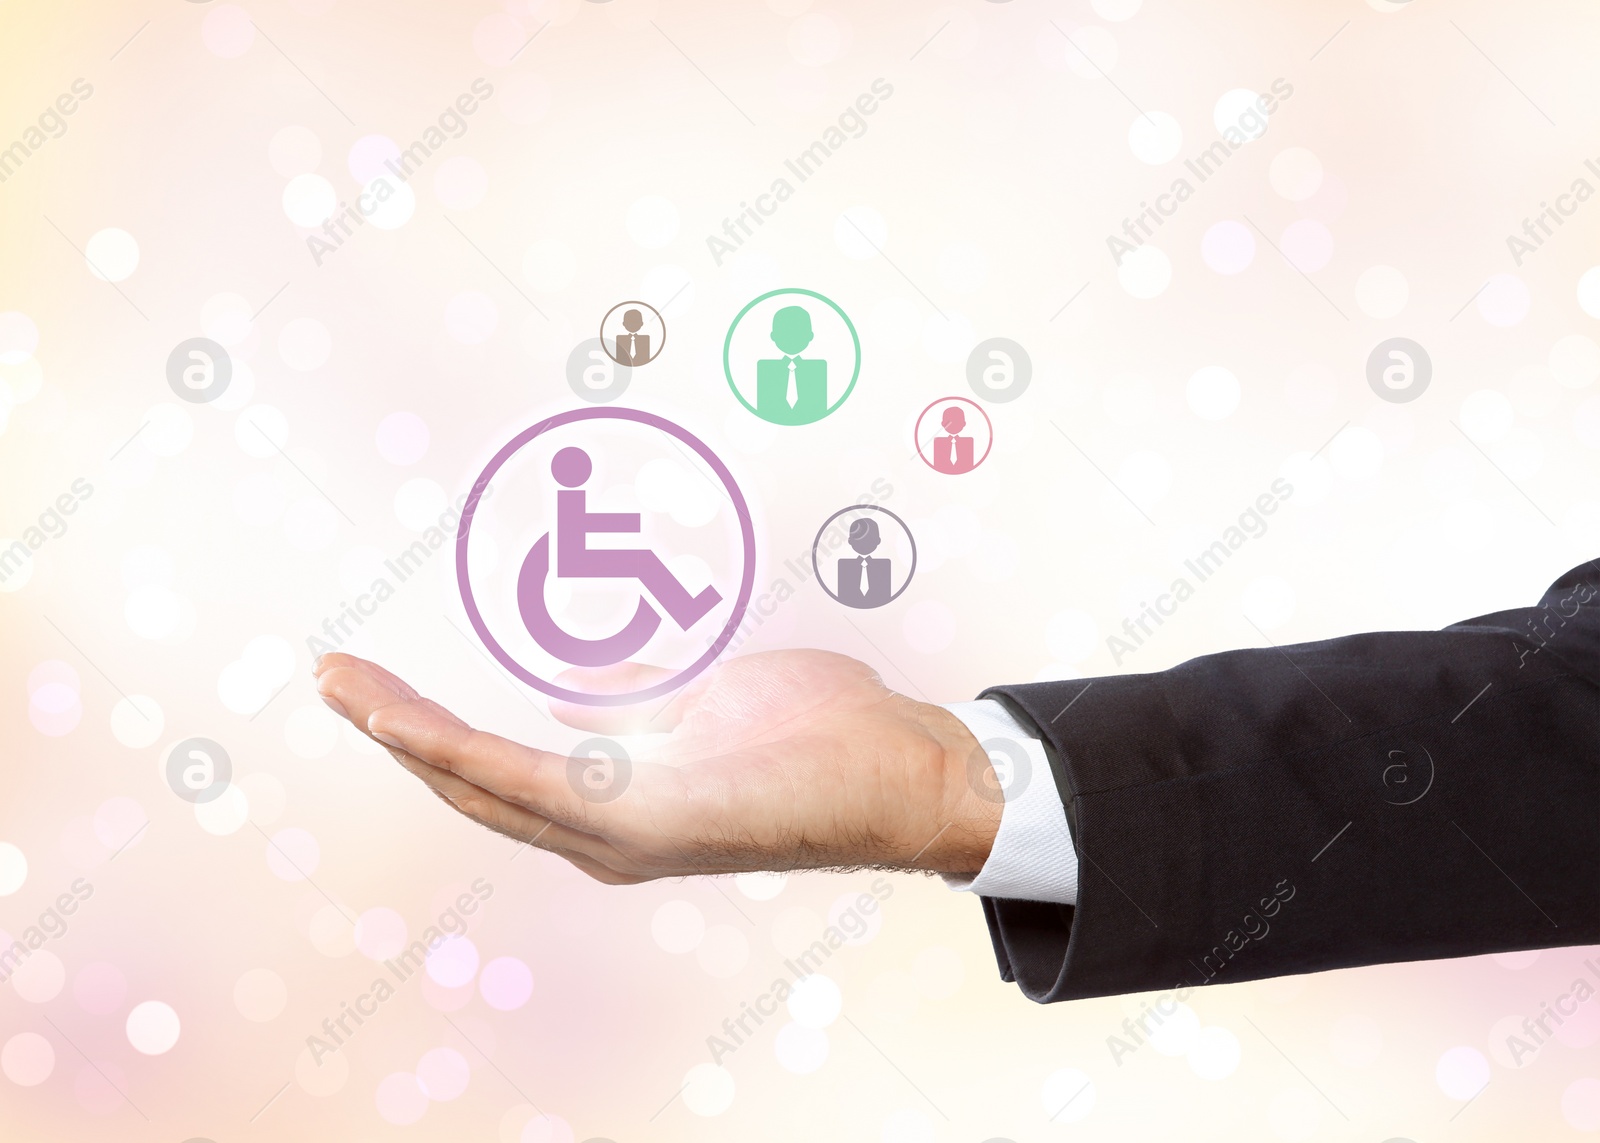 Image of Inclusive workplace culture. Businessman holding international symbol of access and employee icons on light background, closeup